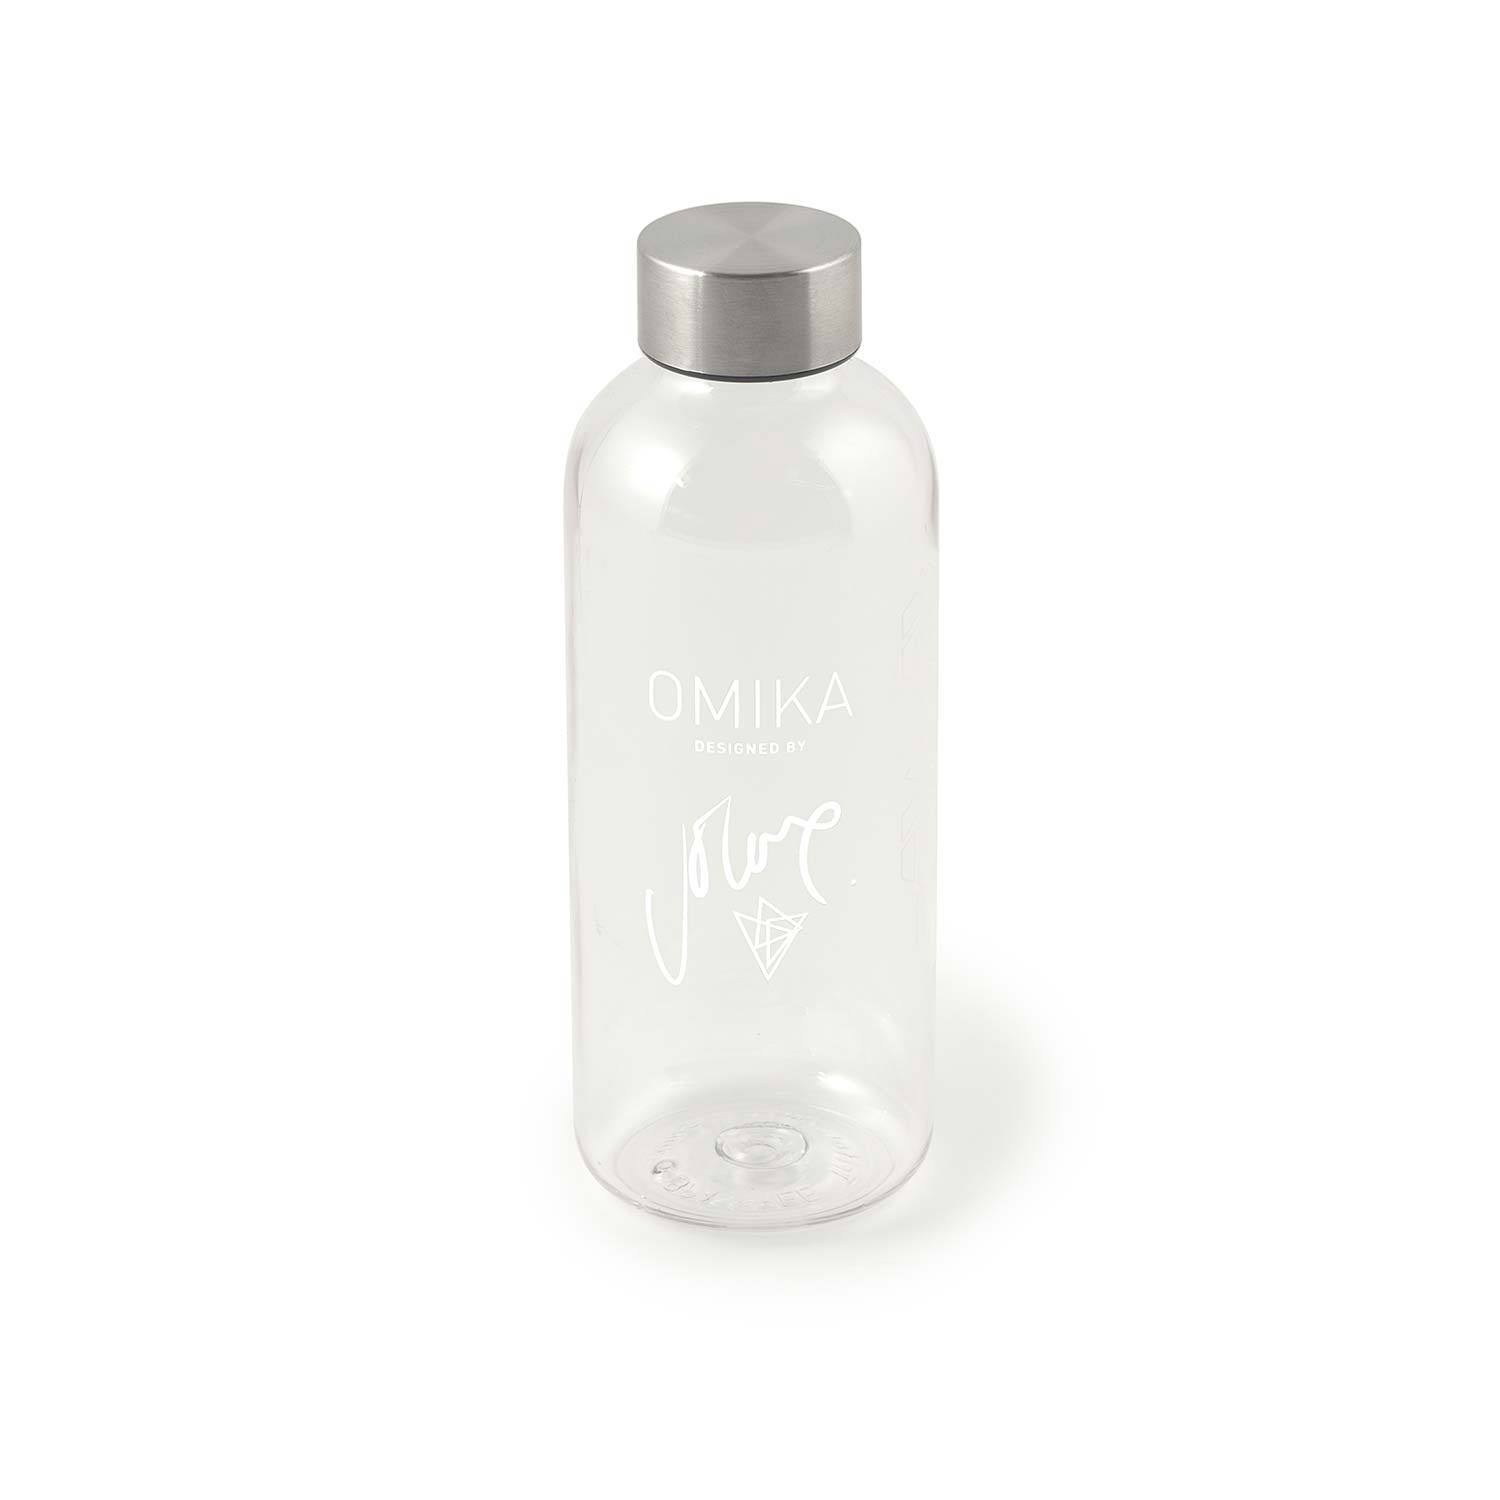 Clear plastic water bottle with a silver cap.